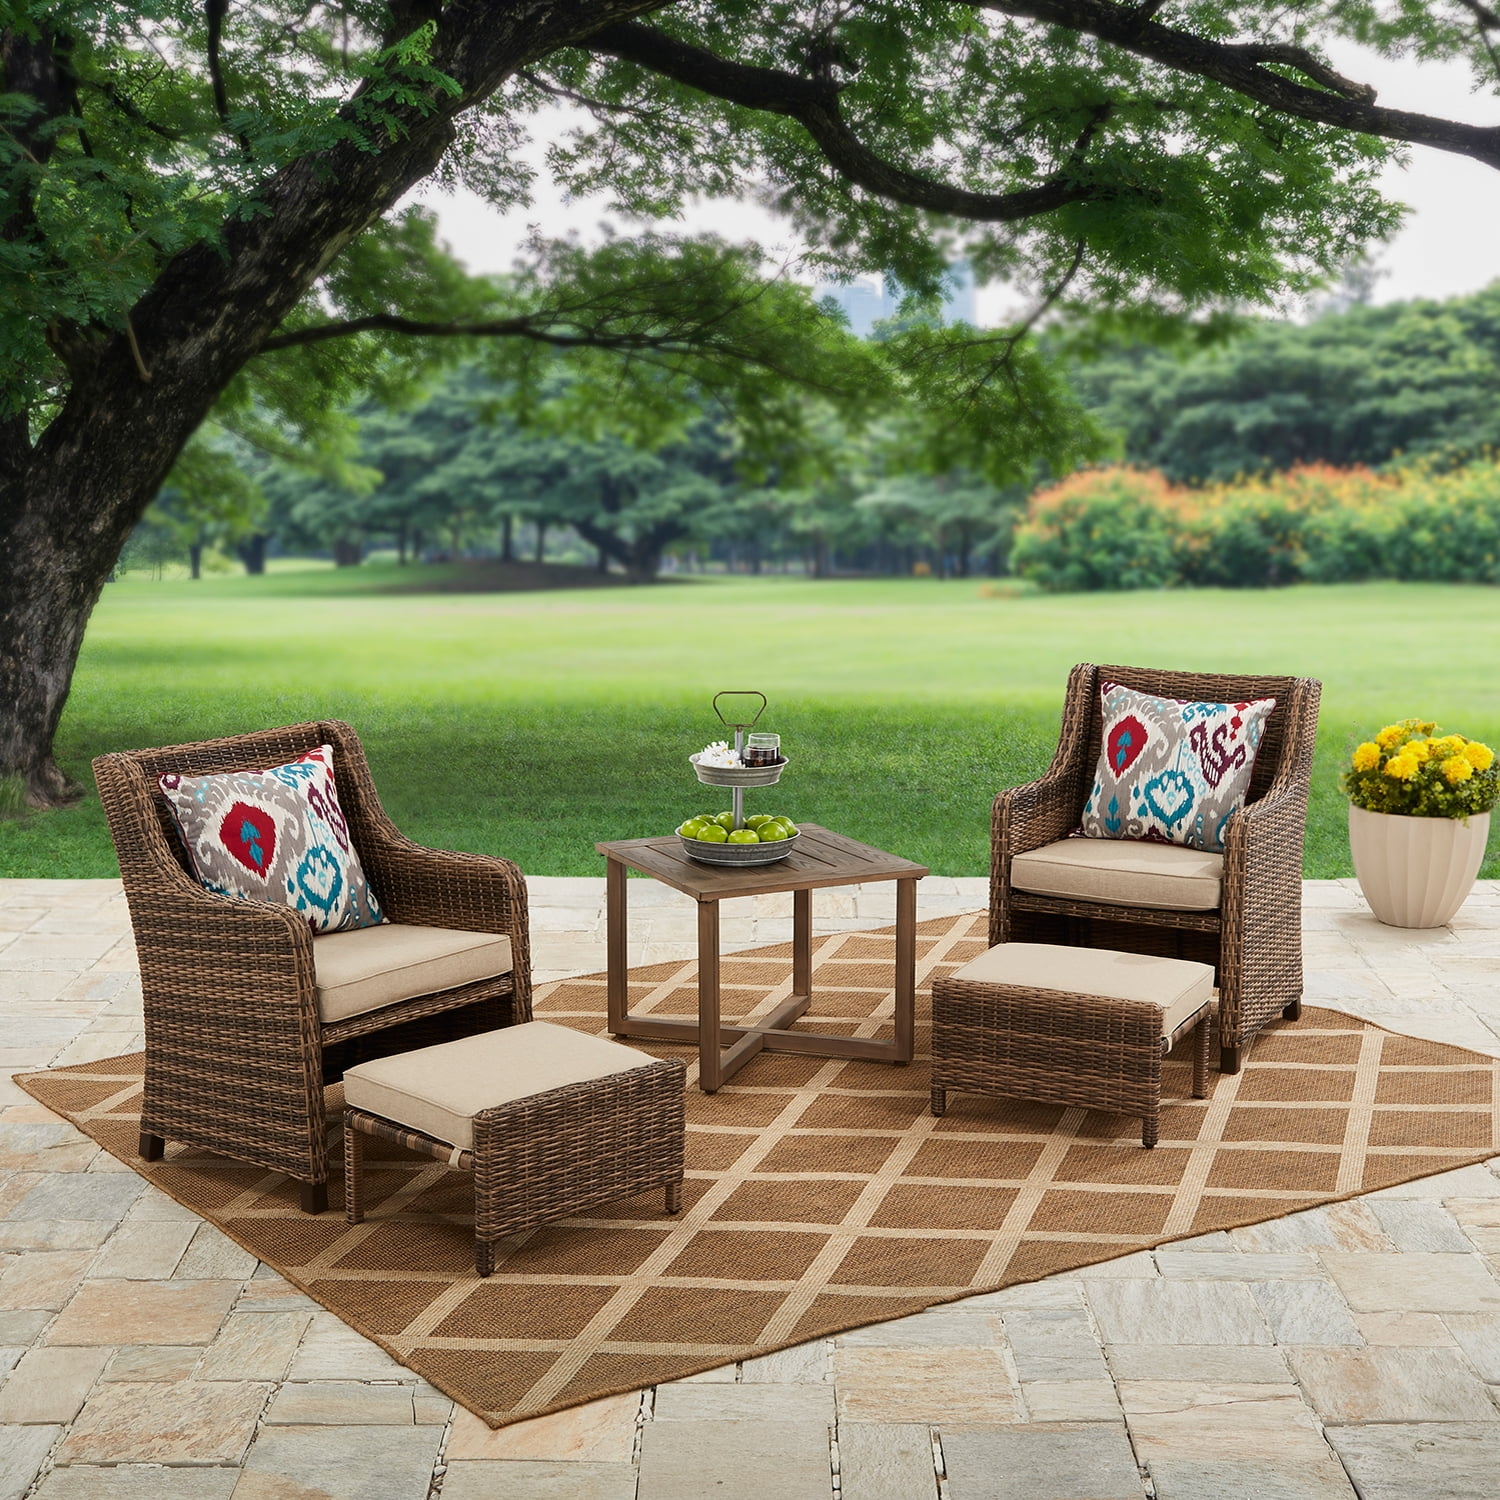 5-Piece Better Homes & Garden Hawthorne Park Outdoor Chat Set w/ Beige Cushions $347 + Free Shipping